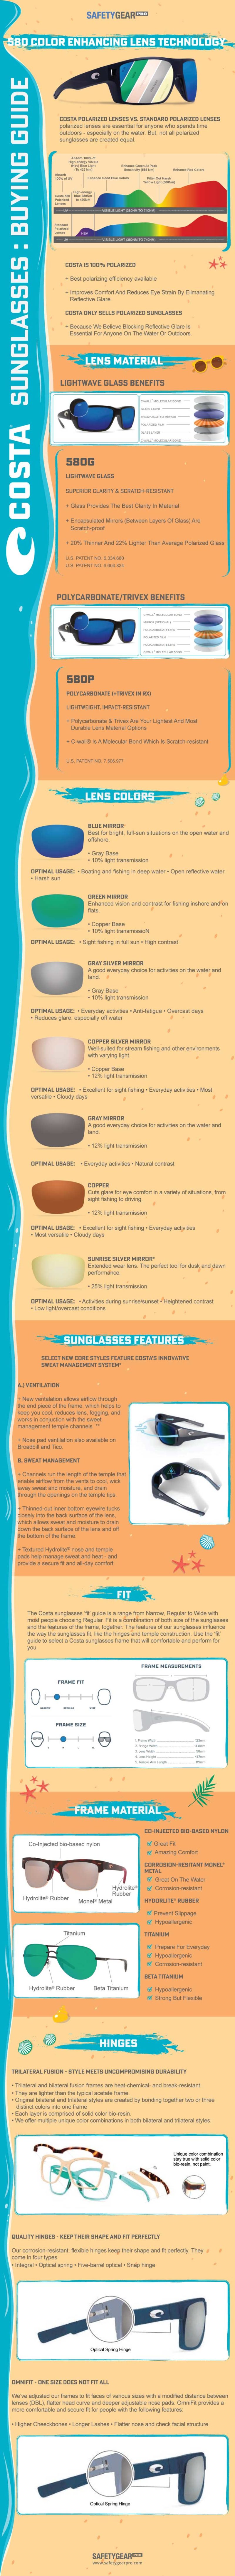 Your Buying Guide for Costa Sunglasses infographic